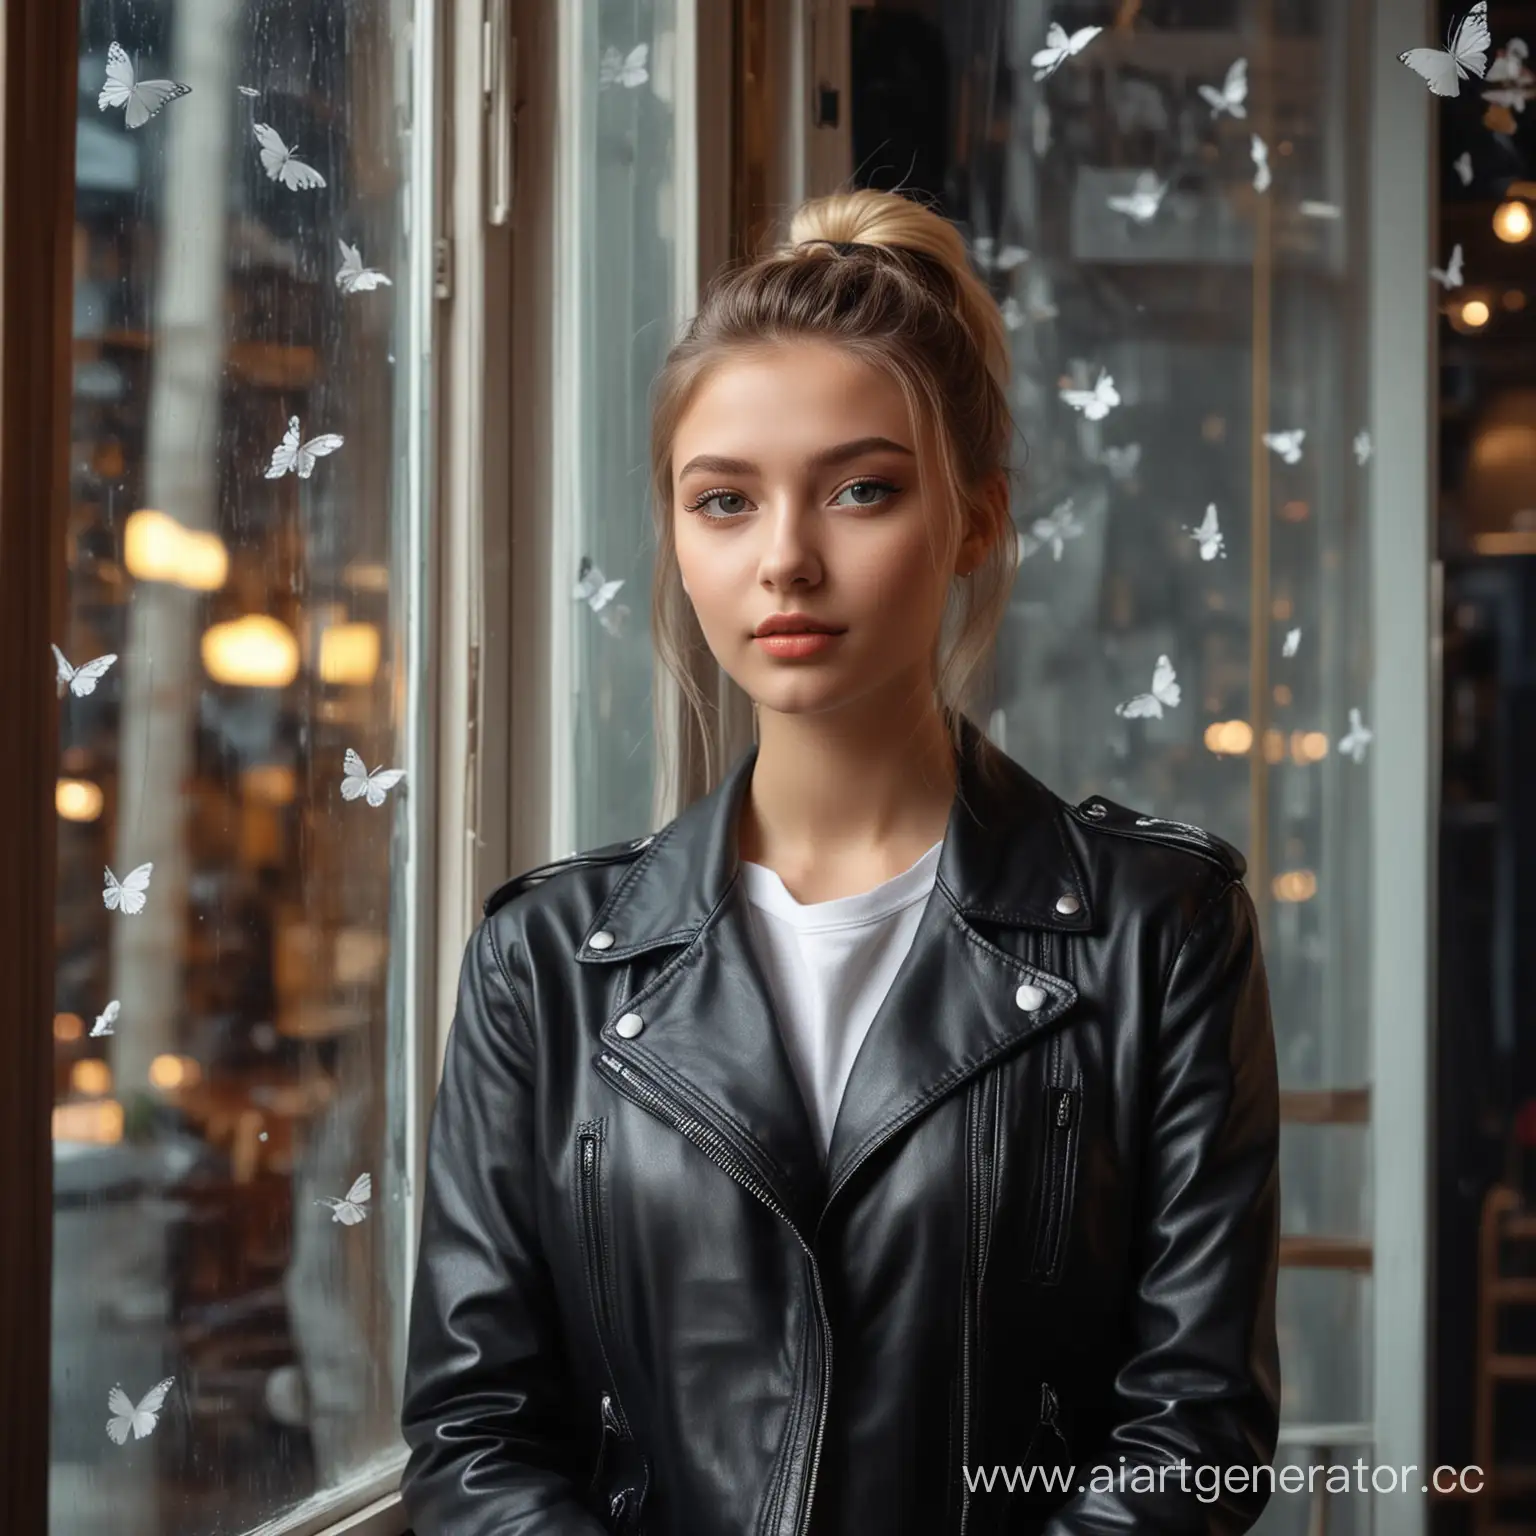 A very beautiful girl of 16 years old, dressed in a leather jacket in the style of the nineties, very bright makeup and hairstyle of the nineties. In the night city, he stands at the bright window of a restaurant with white butterflies flying on the window of the showcase